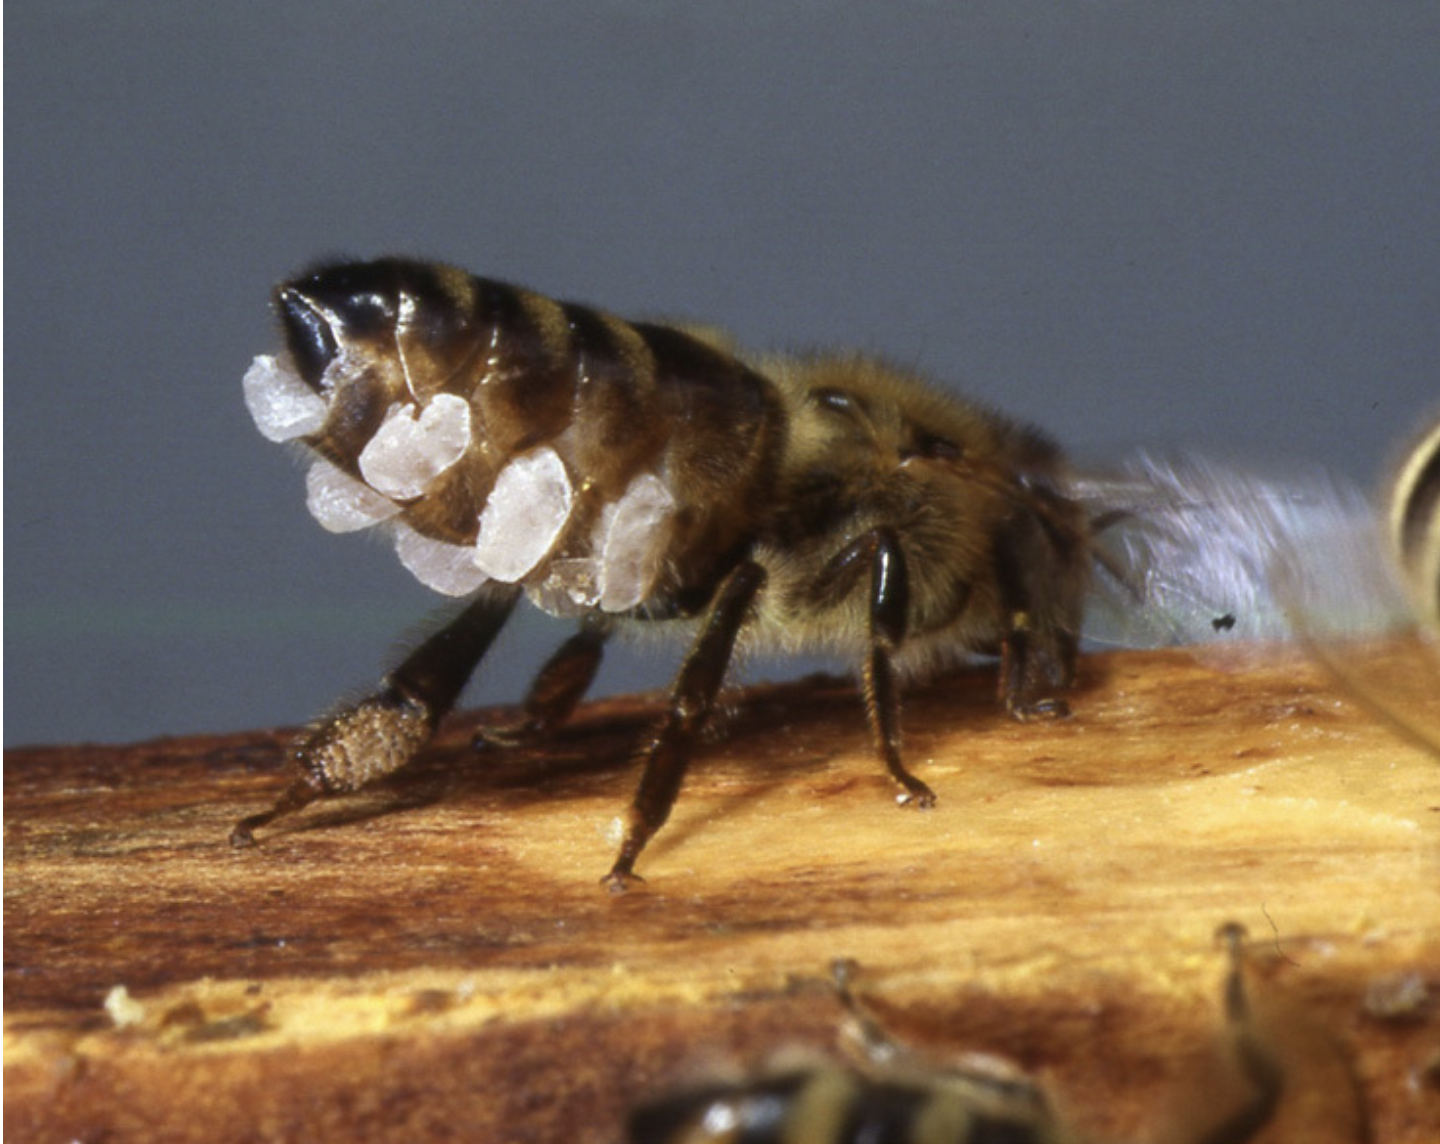 a honey bee making beeswax flakes from their abdominal glands